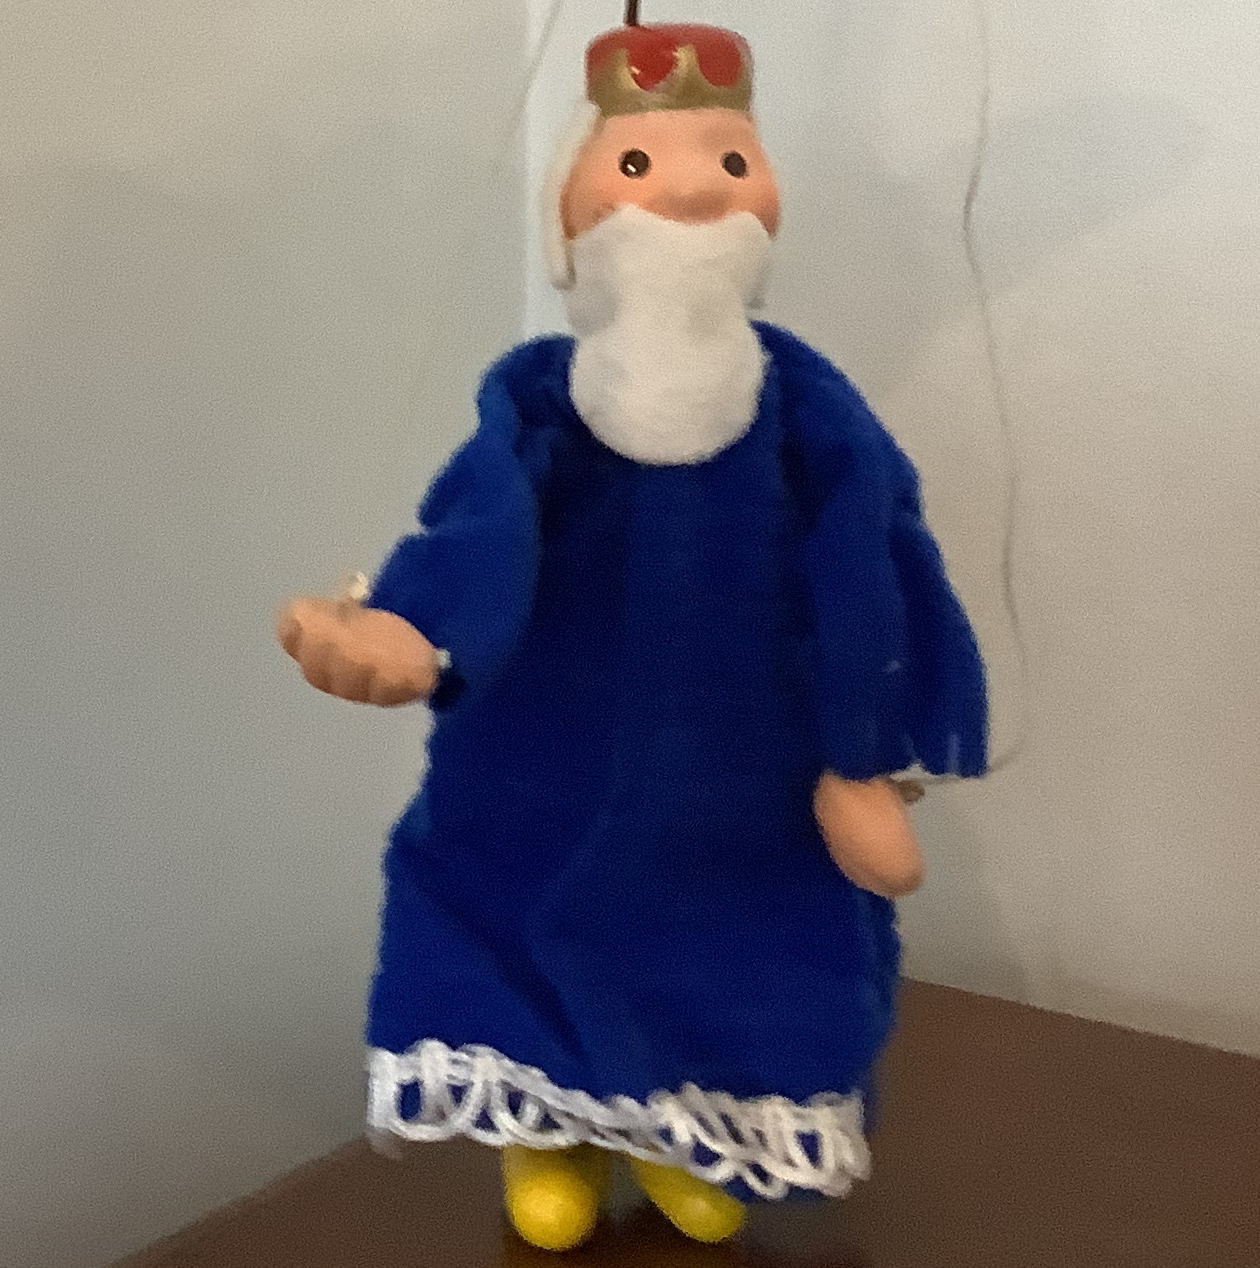 Puppet of old man wearing red crown and blue robe